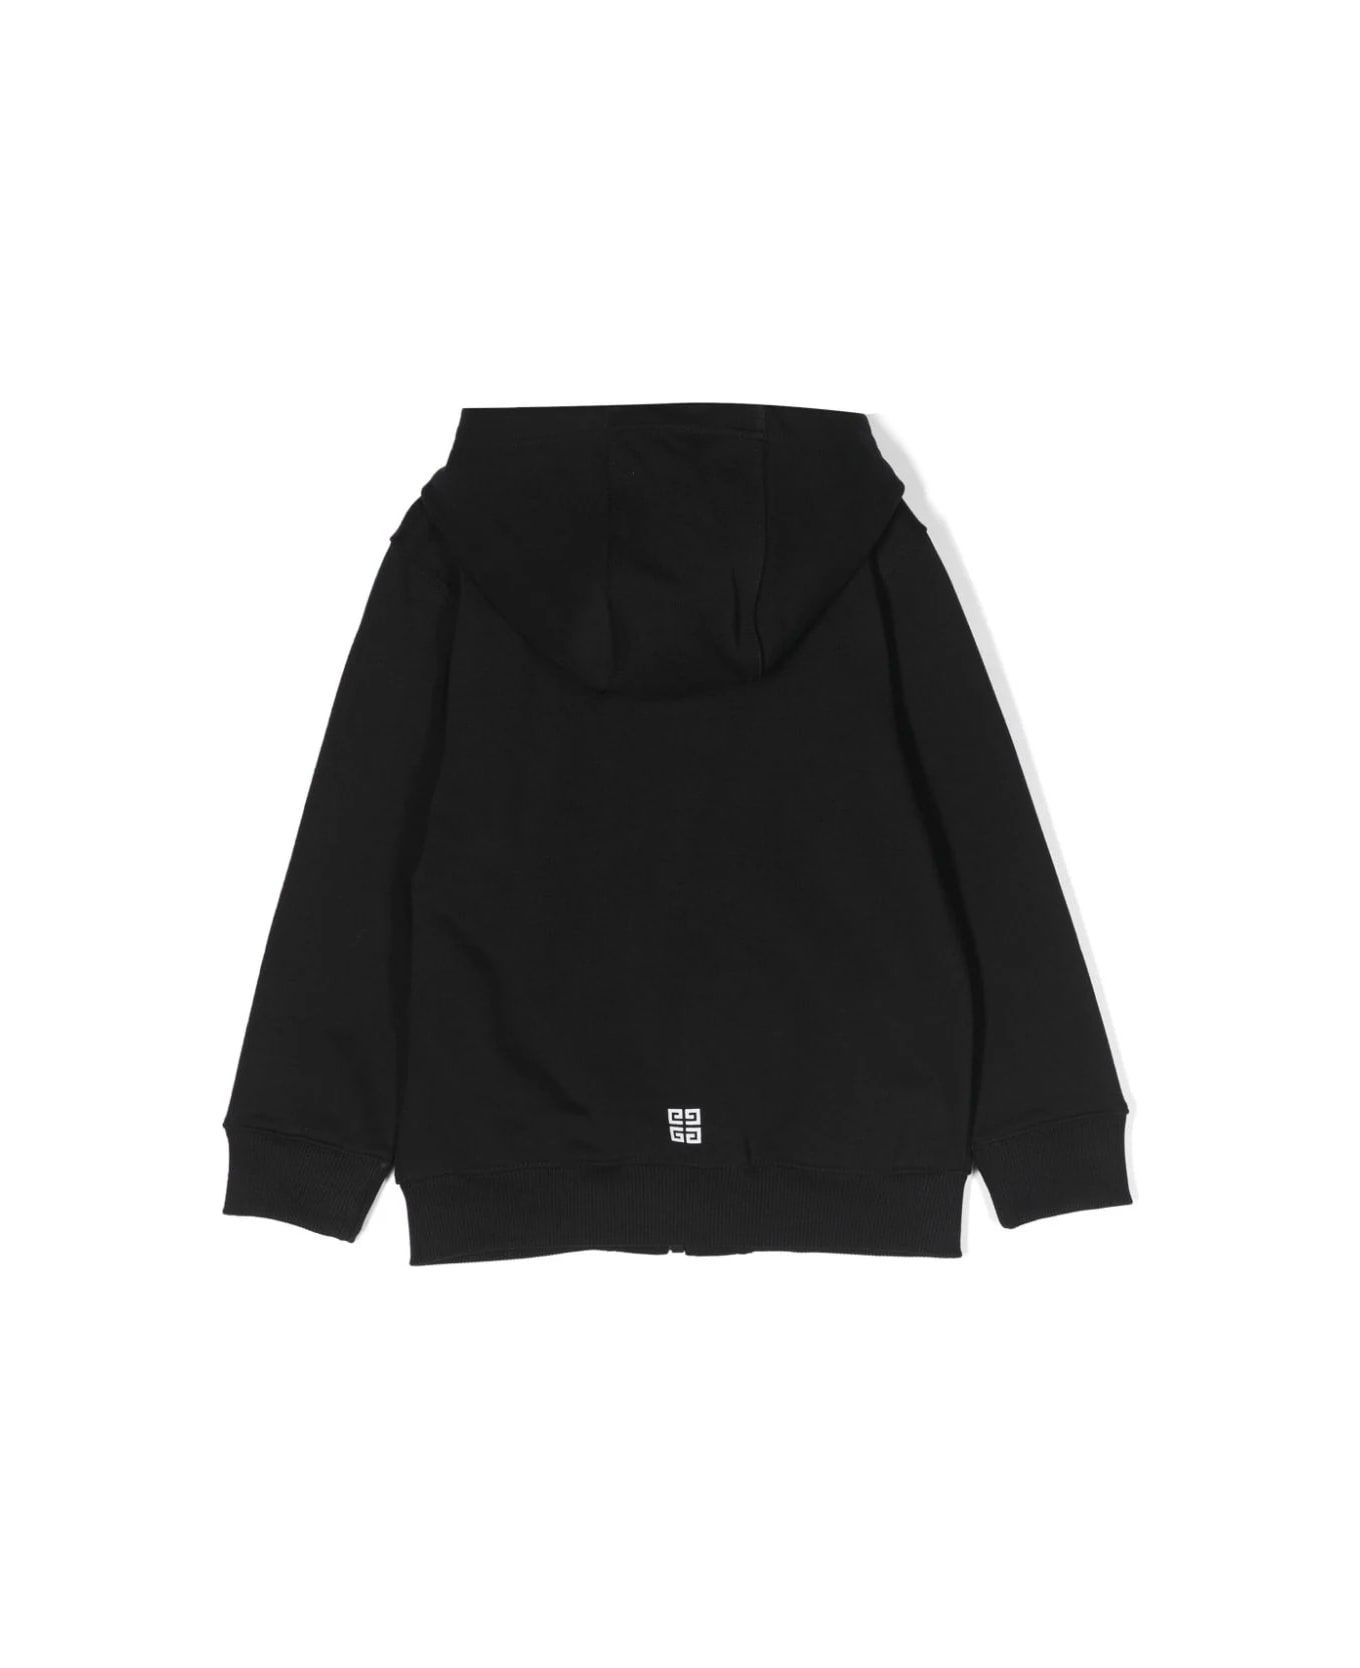 Givenchy Black Givenchy Zip-up Hoodie - Black